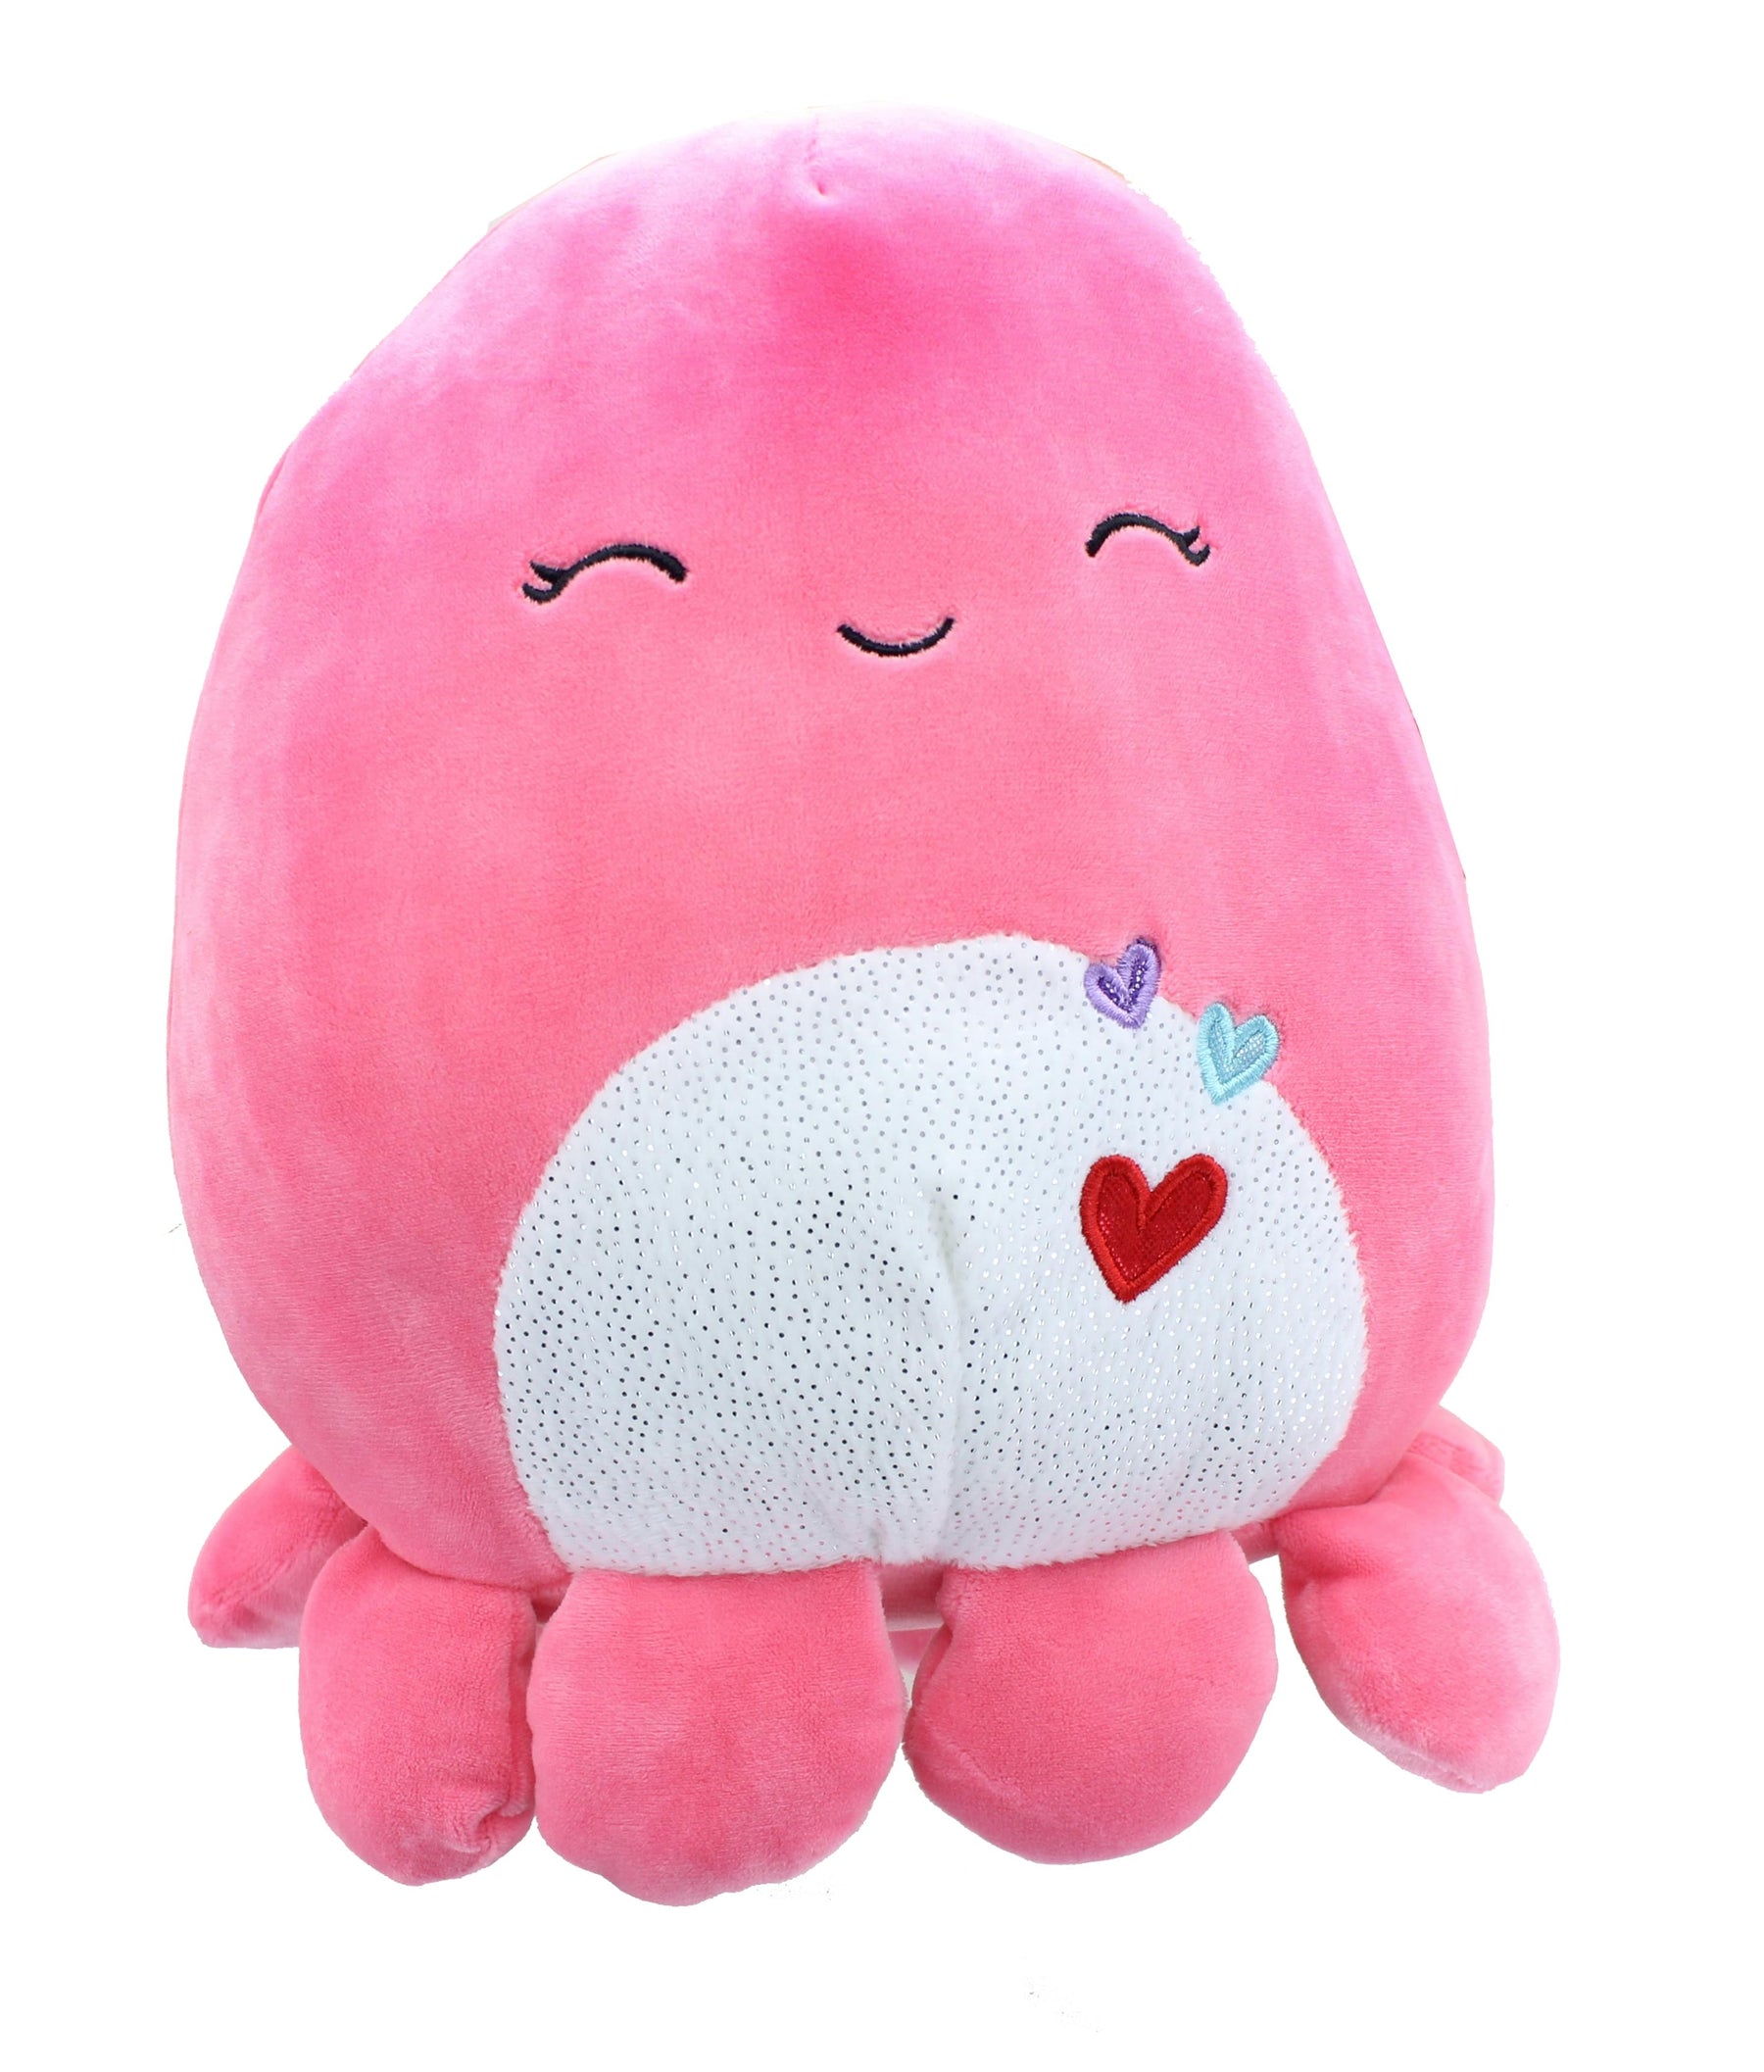 Squishmallow 8 Inch Valentine's Day Plush | Abby the Pink Octopus